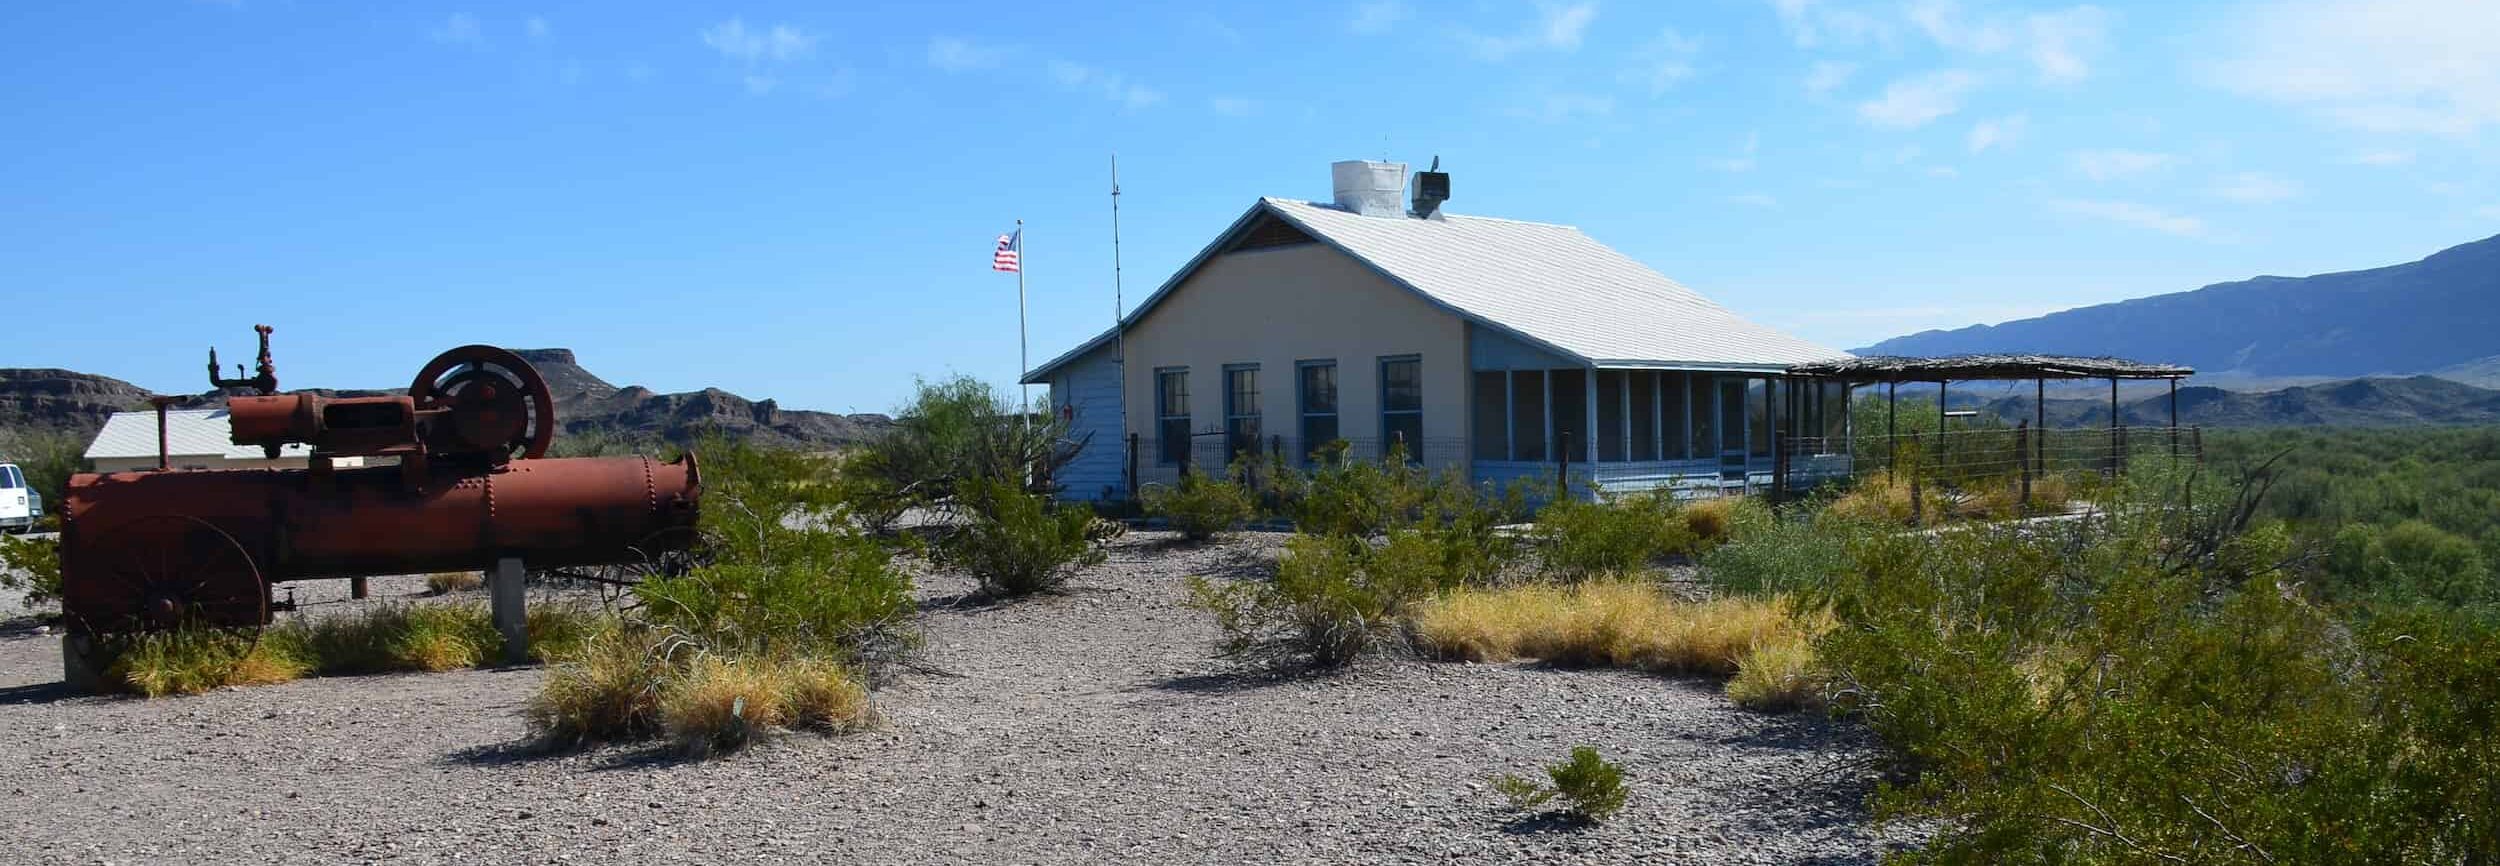 Officers' Quarters at Castolon in Big Bend National Park in Texas